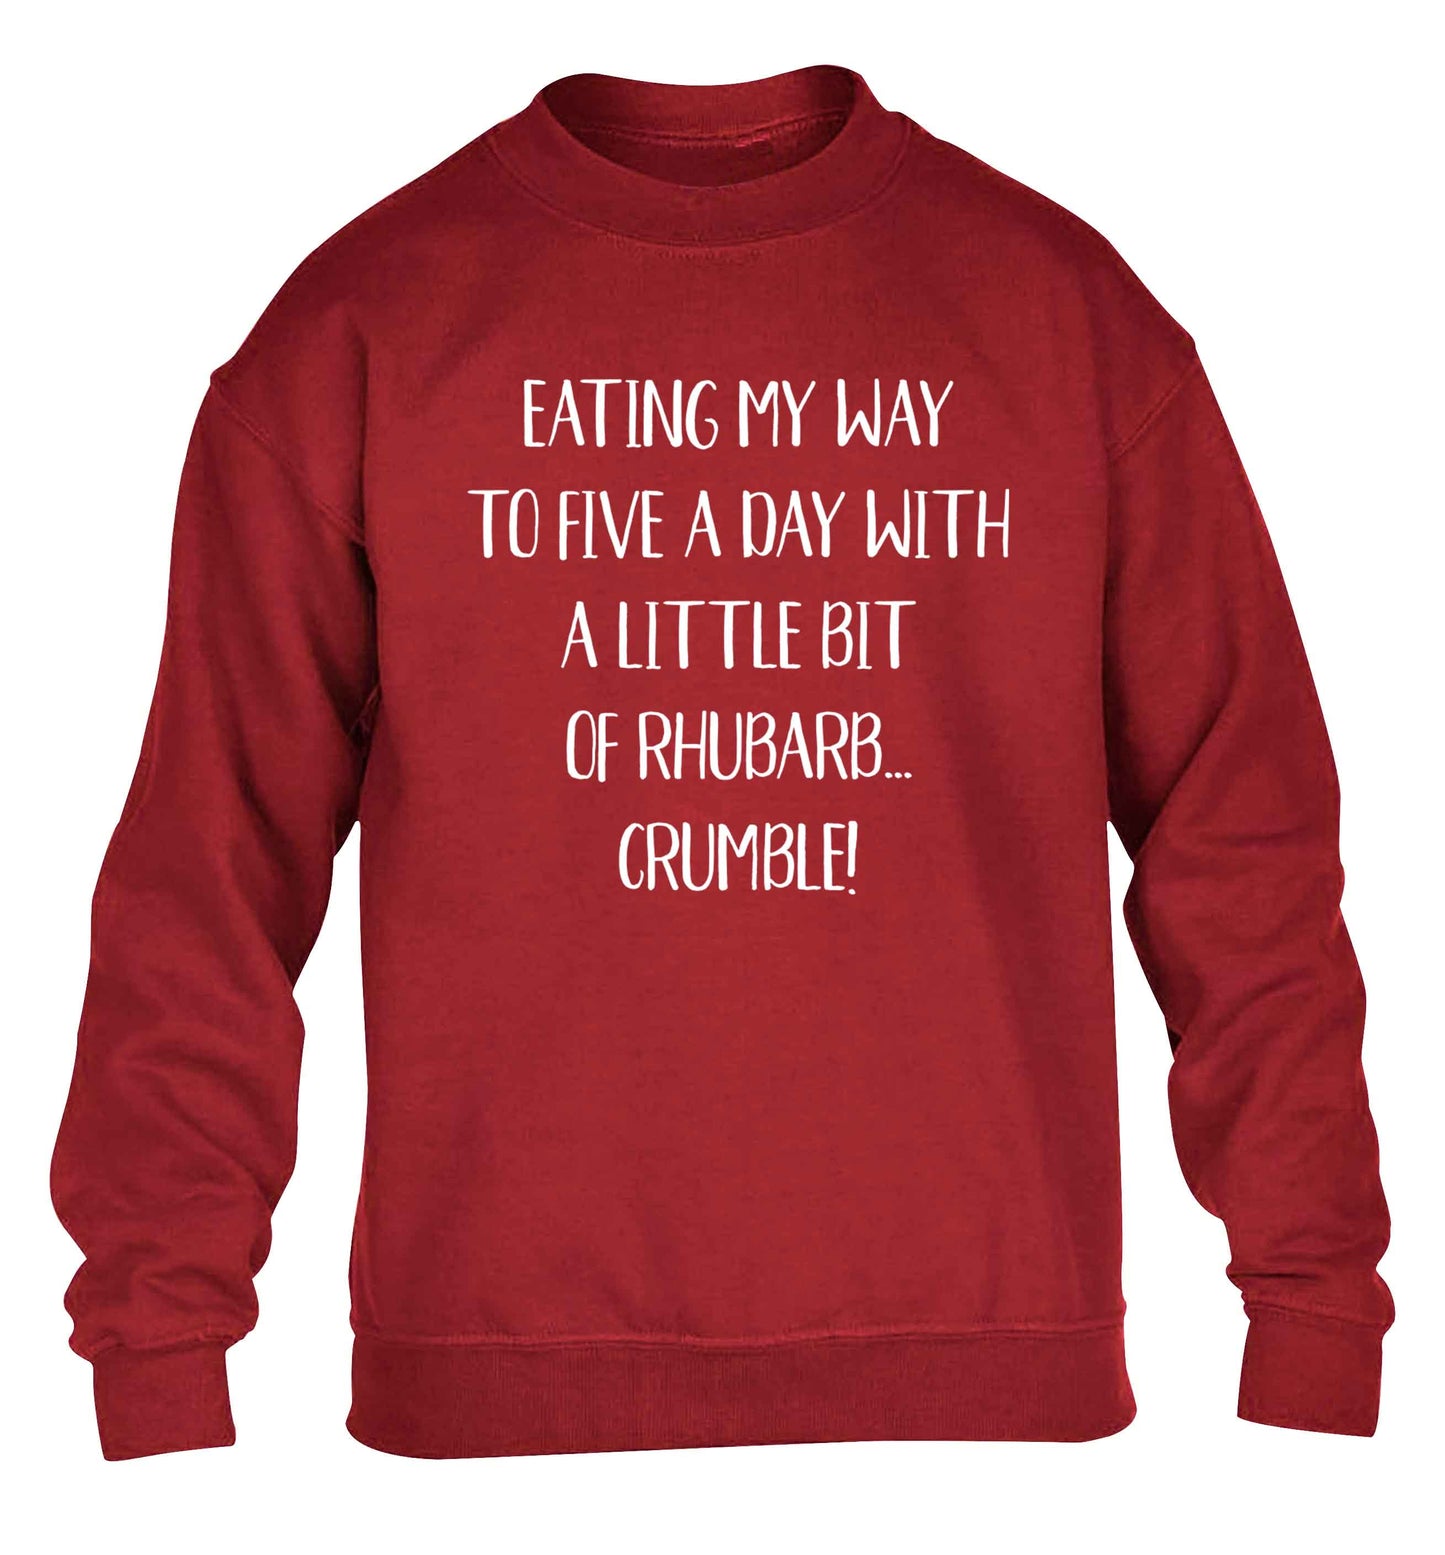 Eating my way to five a day with a little bit of rhubarb crumble children's grey sweater 12-13 Years